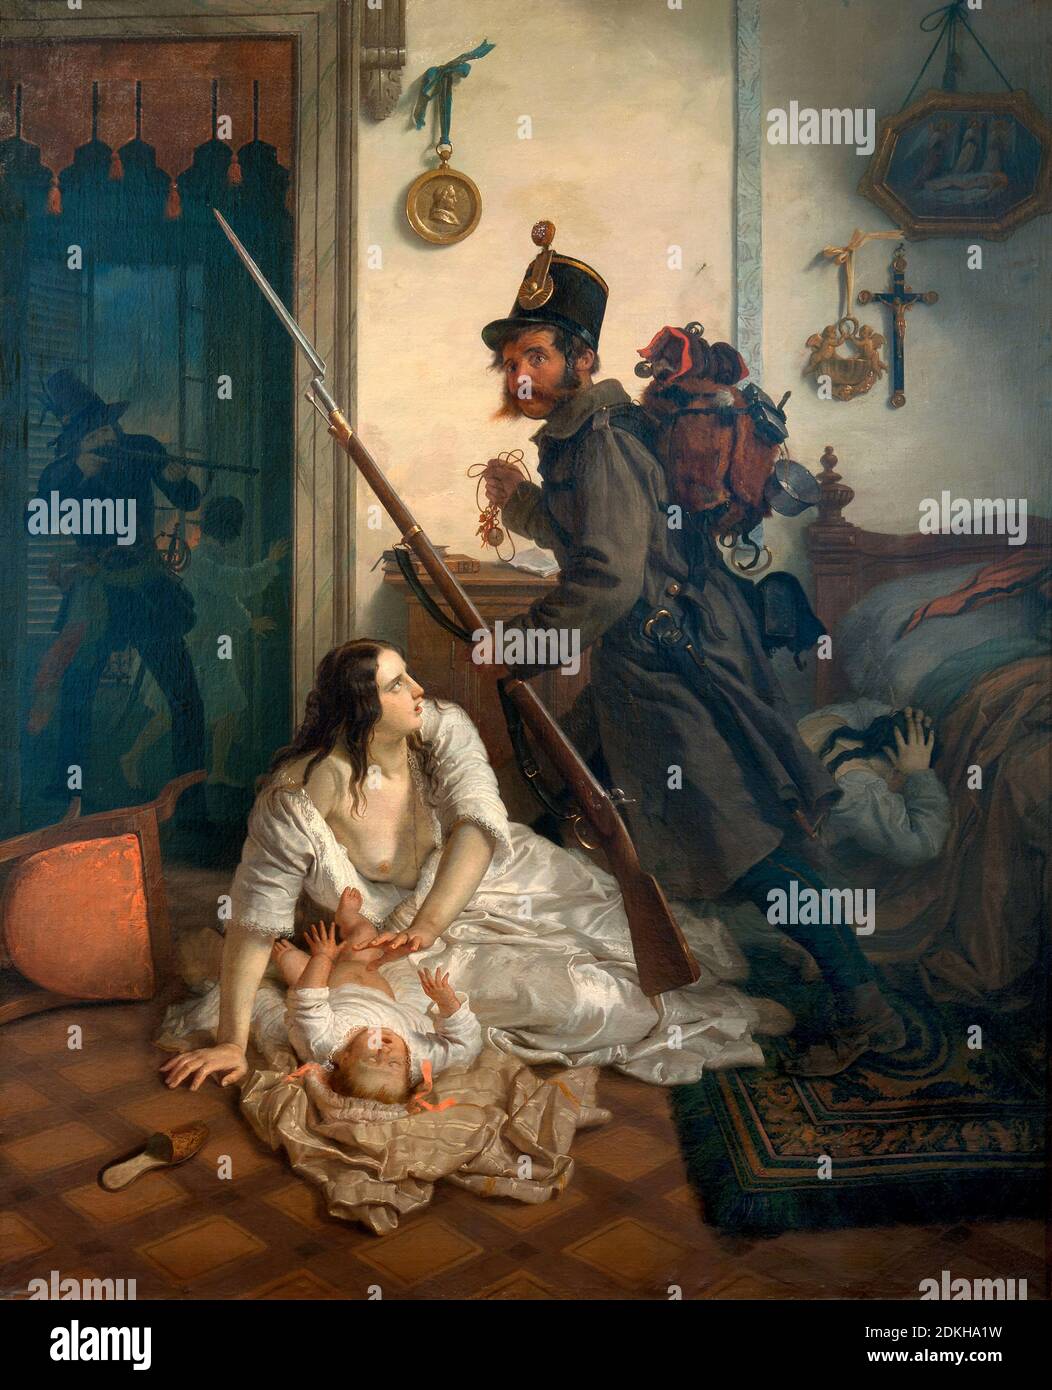 Baldassare Verazzi. 1819-1886. Looting episode during the Five Days of Milan. about 1848. oil painting on canvas cm 139 x 114. Stock Photo